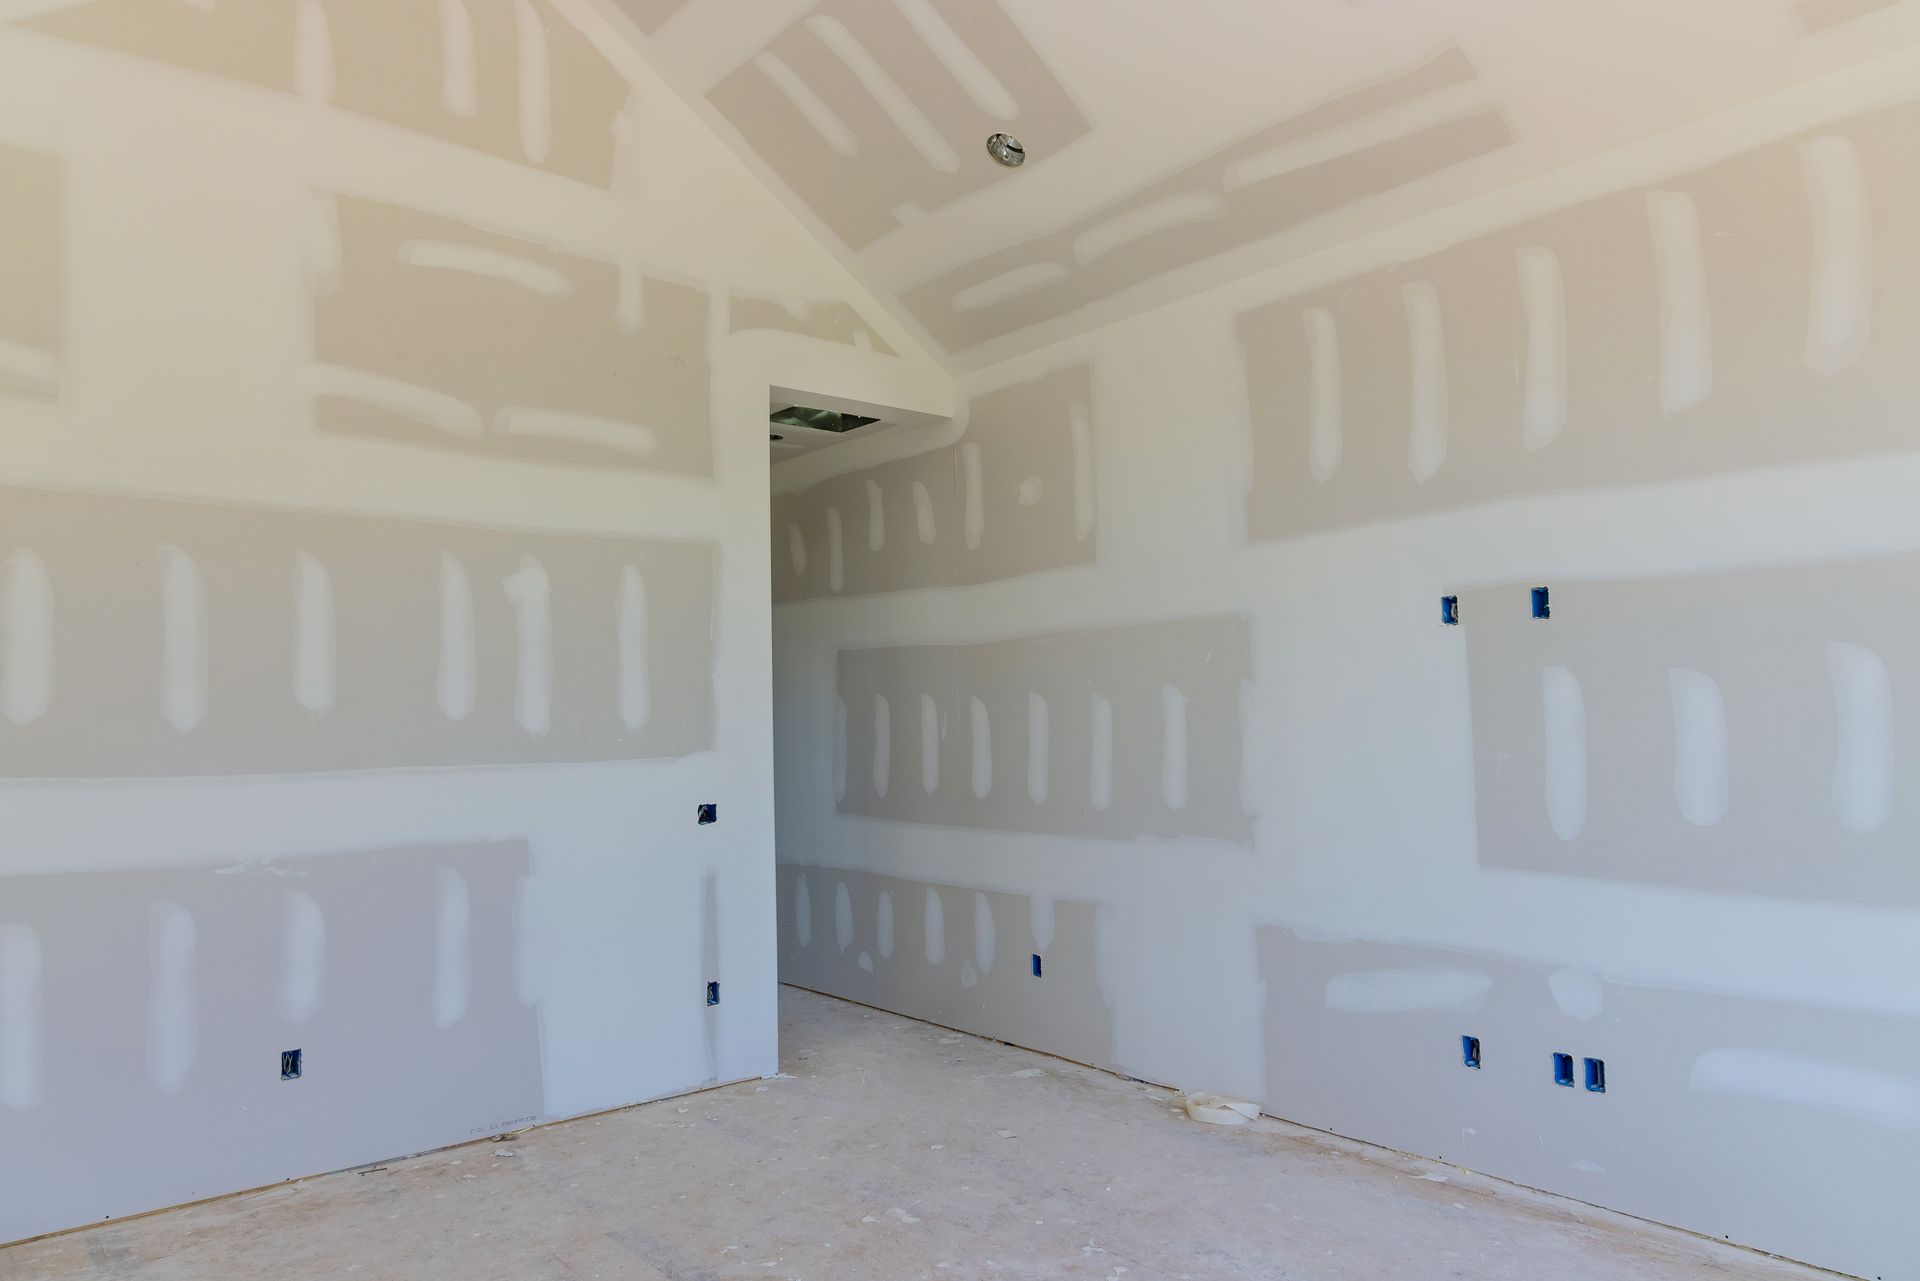 newly built dry wall